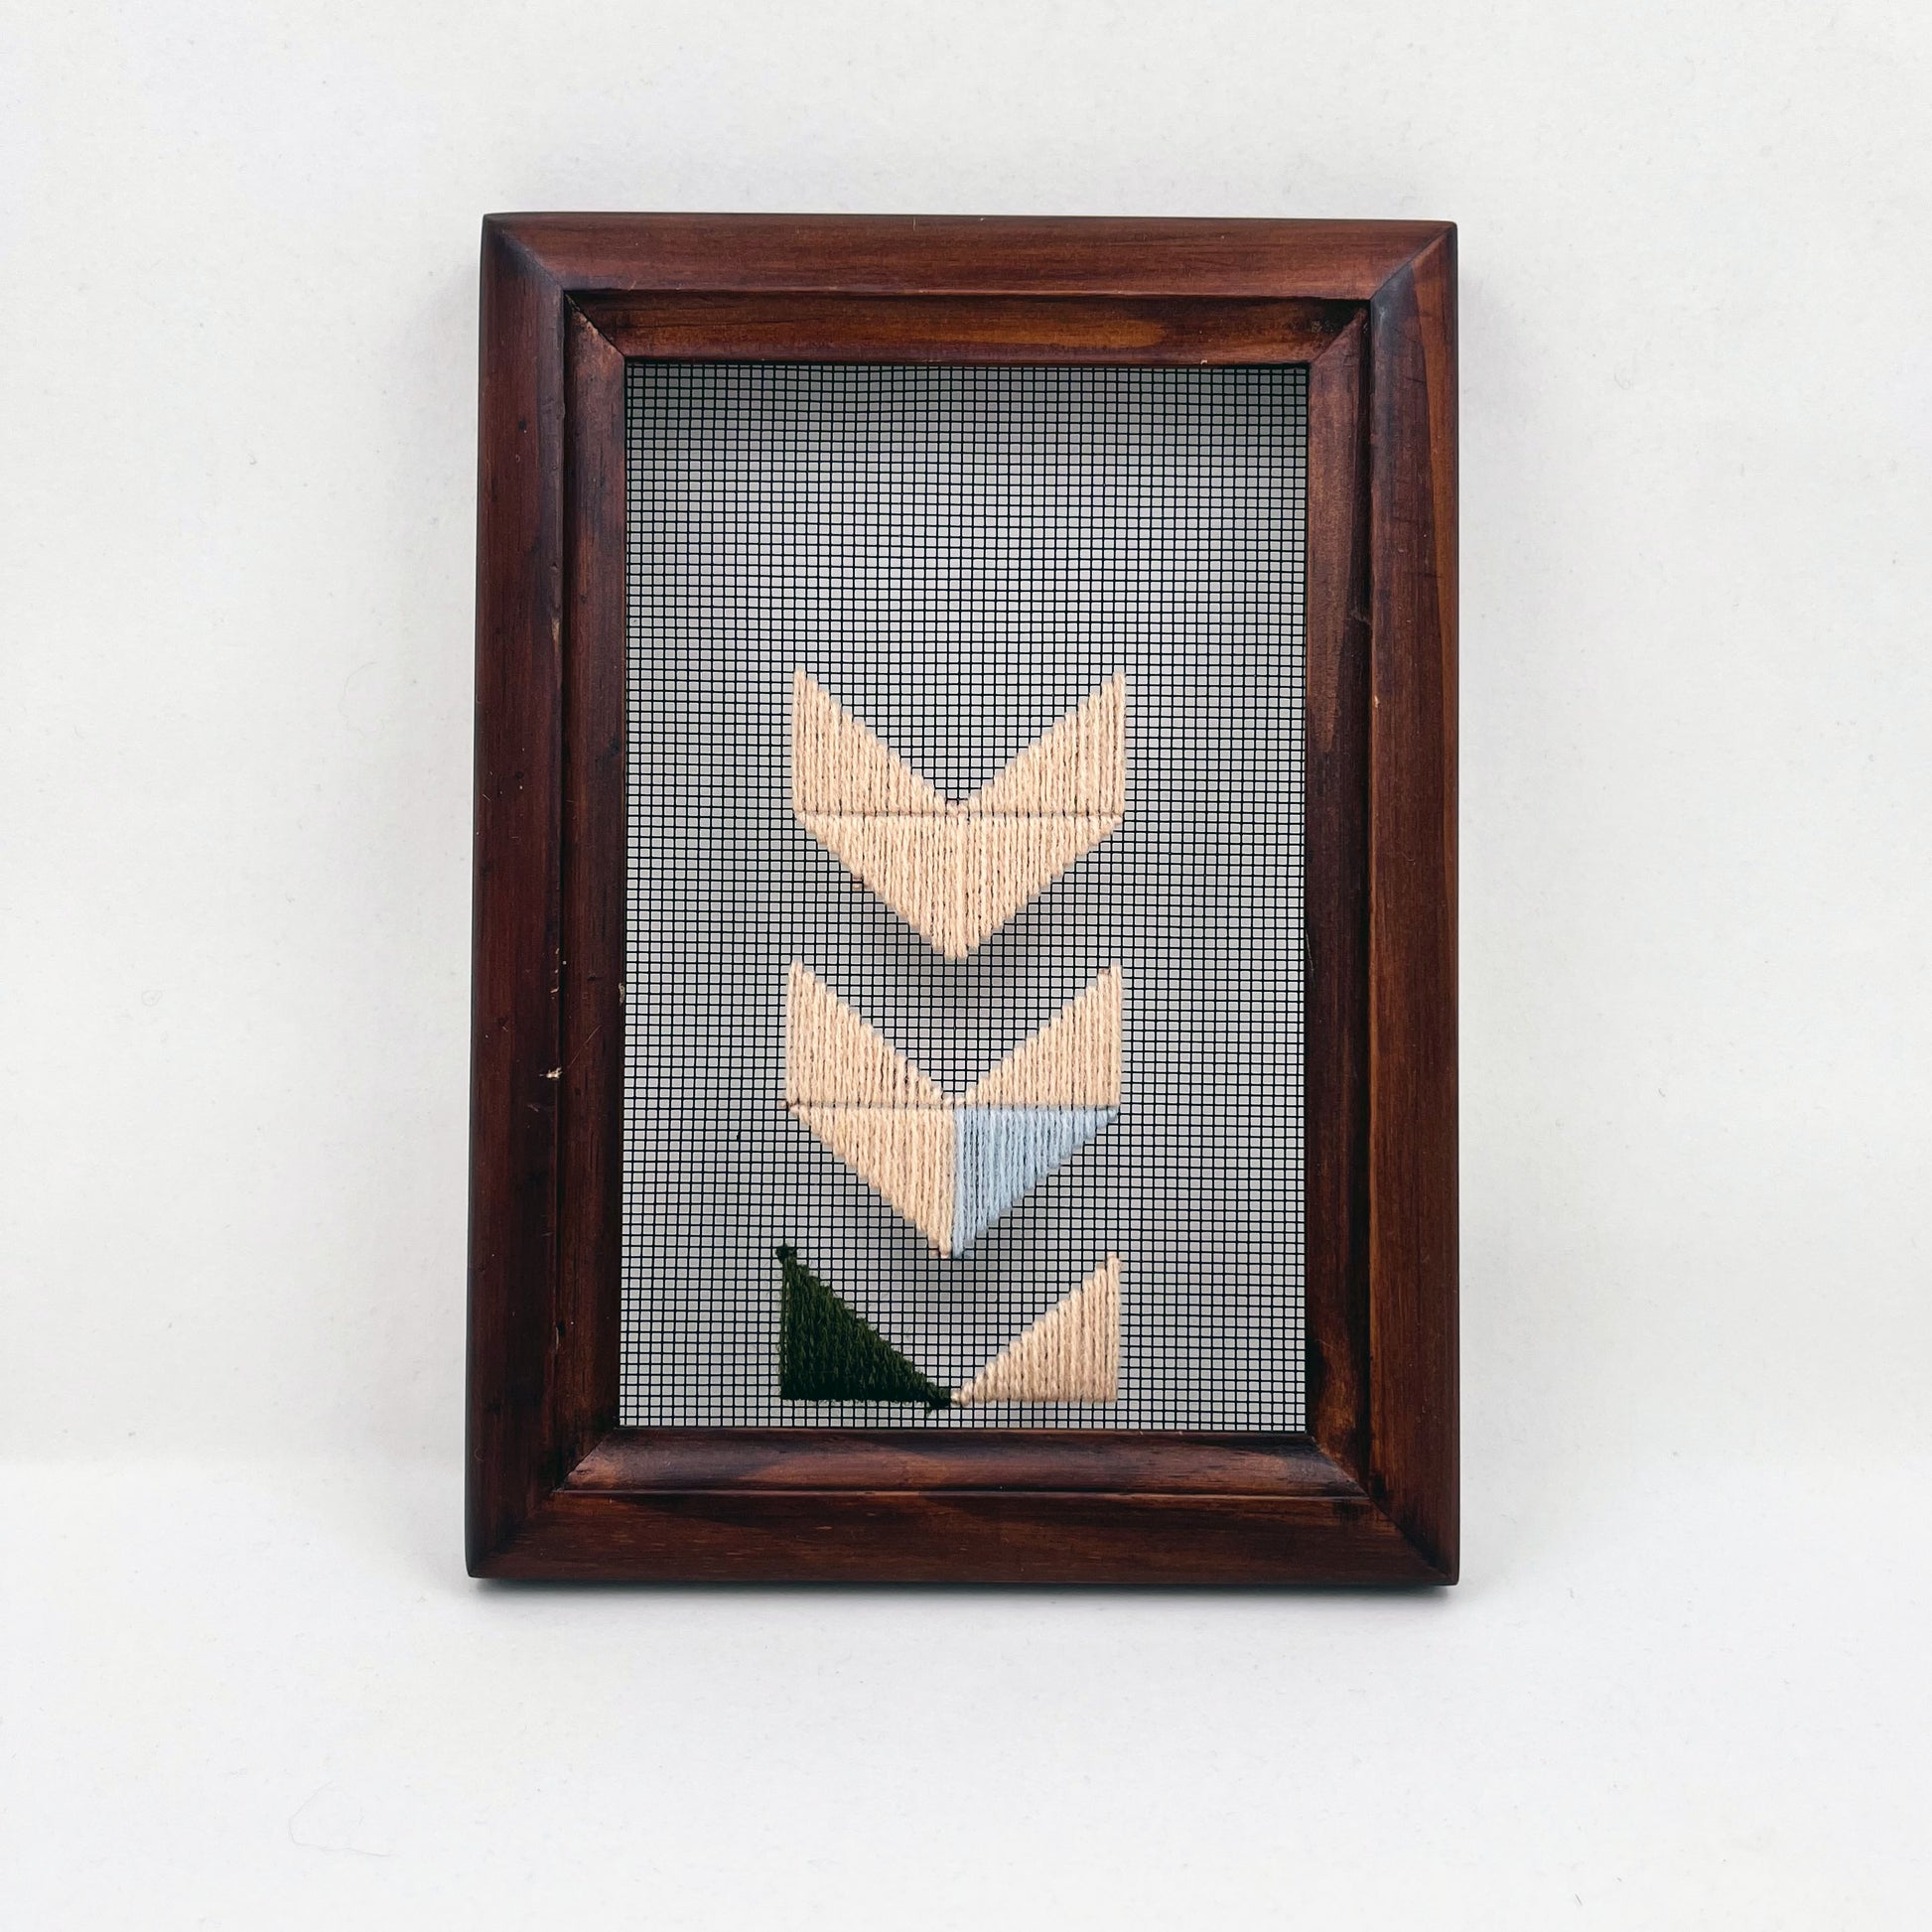 a small wood frame holding window screen hand stitched with triangles forming the shapes of chevrons disappearing off the bottom edge in mostly peach embroidery floss, with accents of light blue and olive green